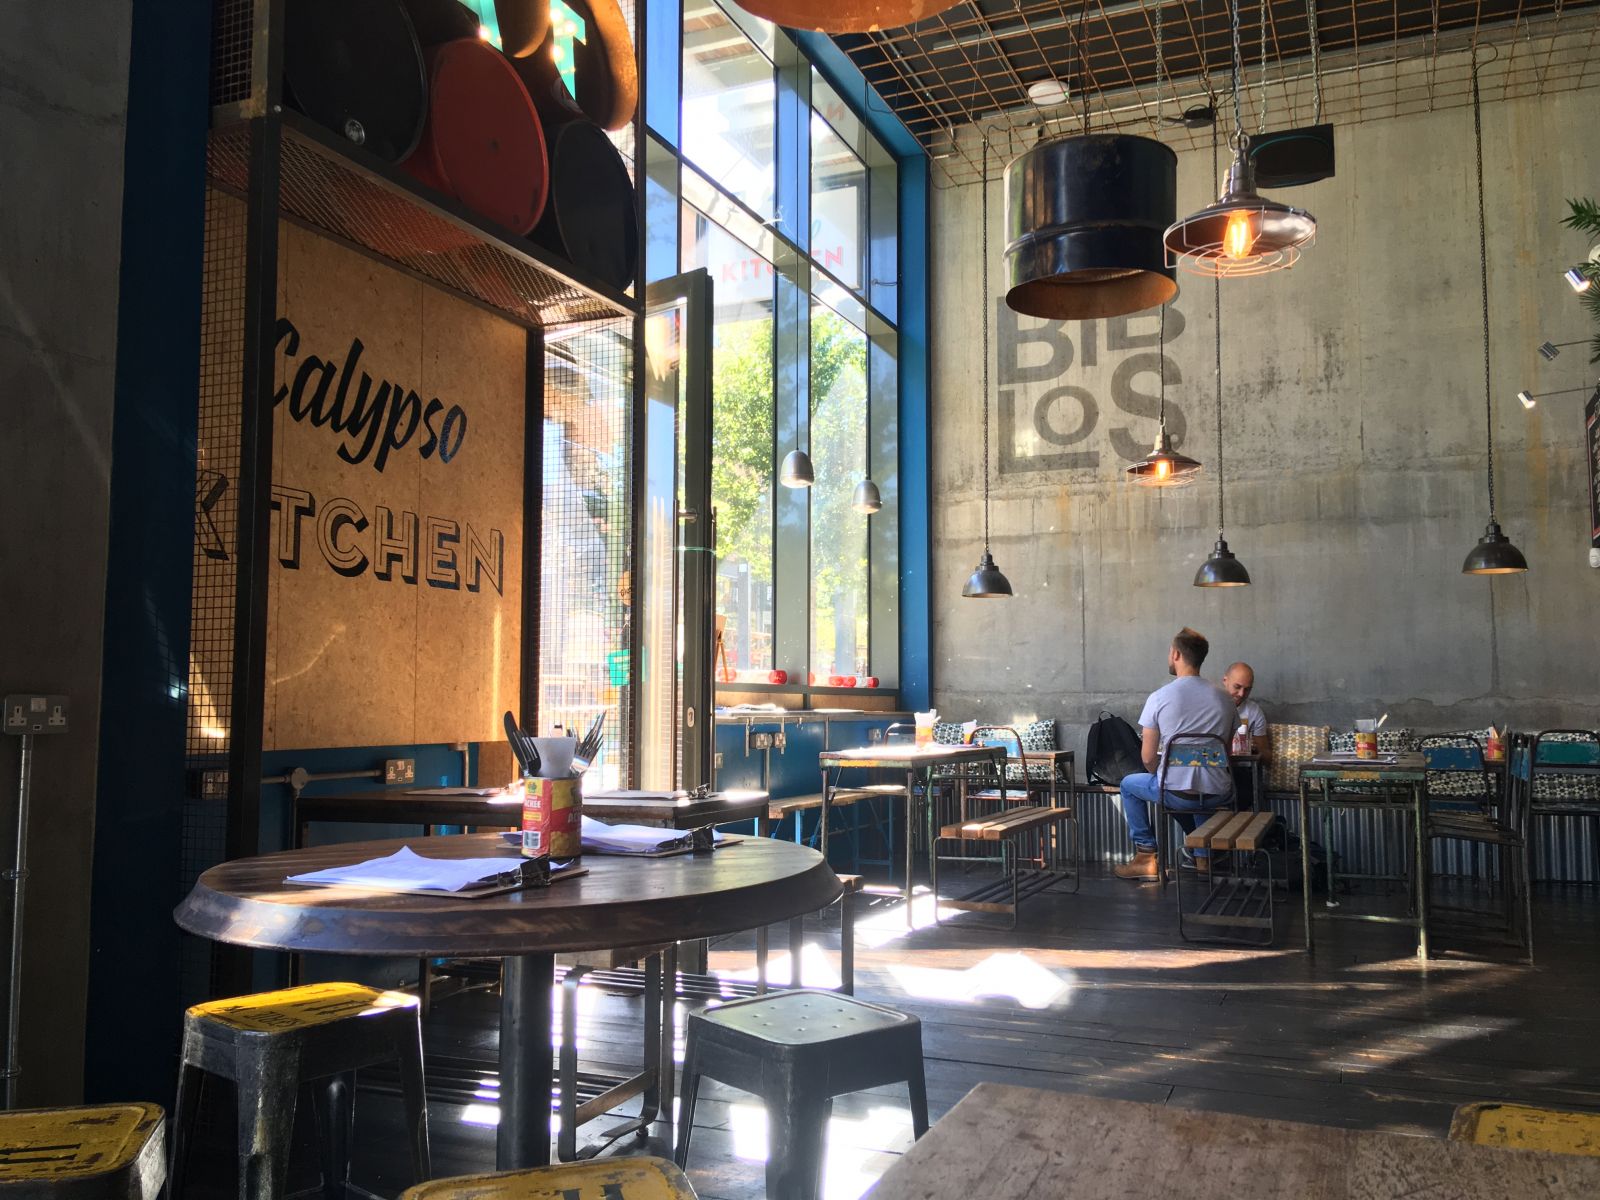 The interior of Calypso Kitchen on Wapping Wharf.